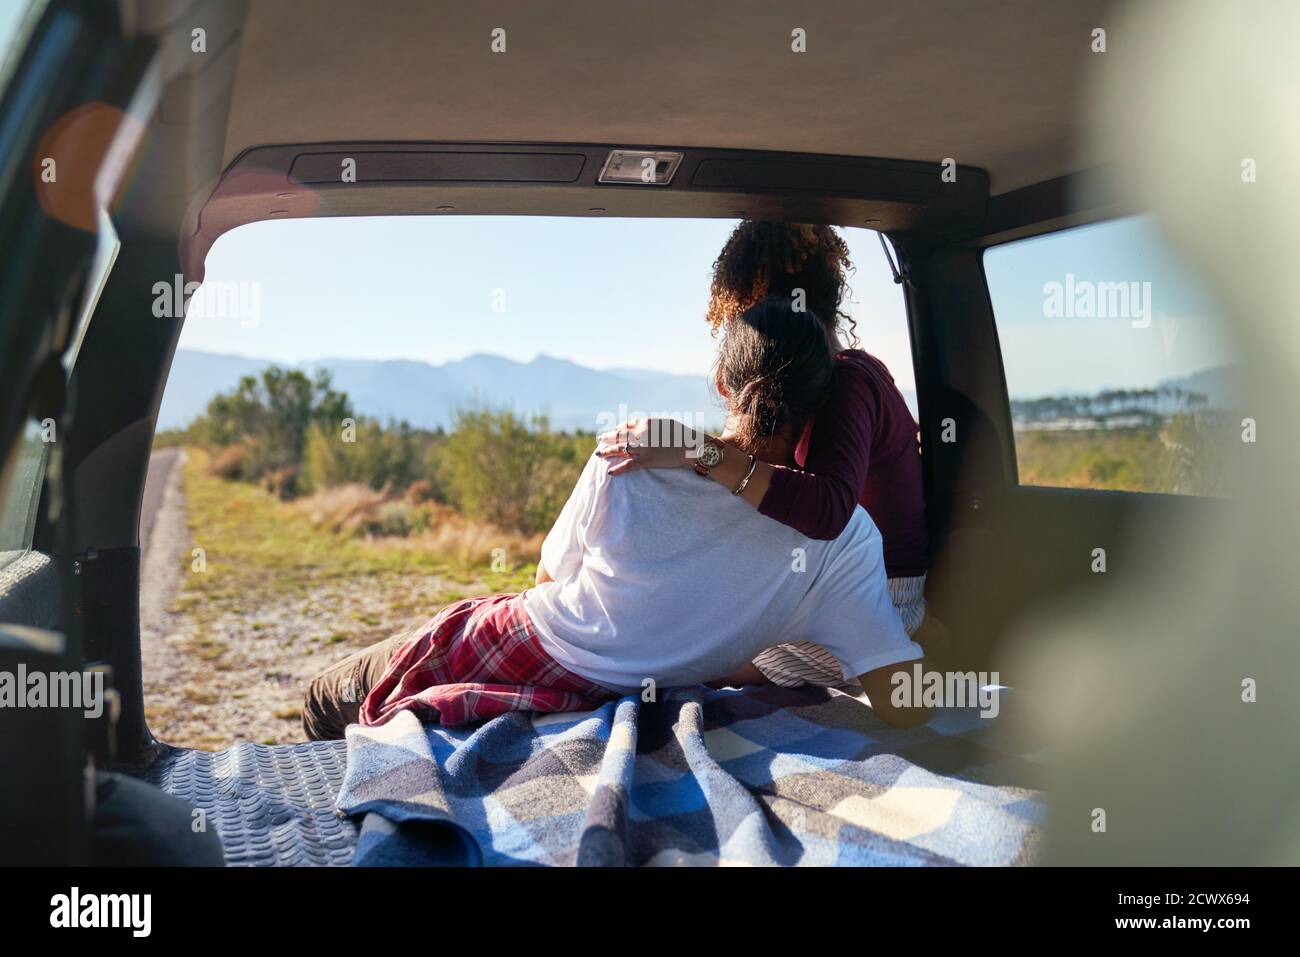 Affectionate young couple enjoying sunny nature view from back of car Stock Photo